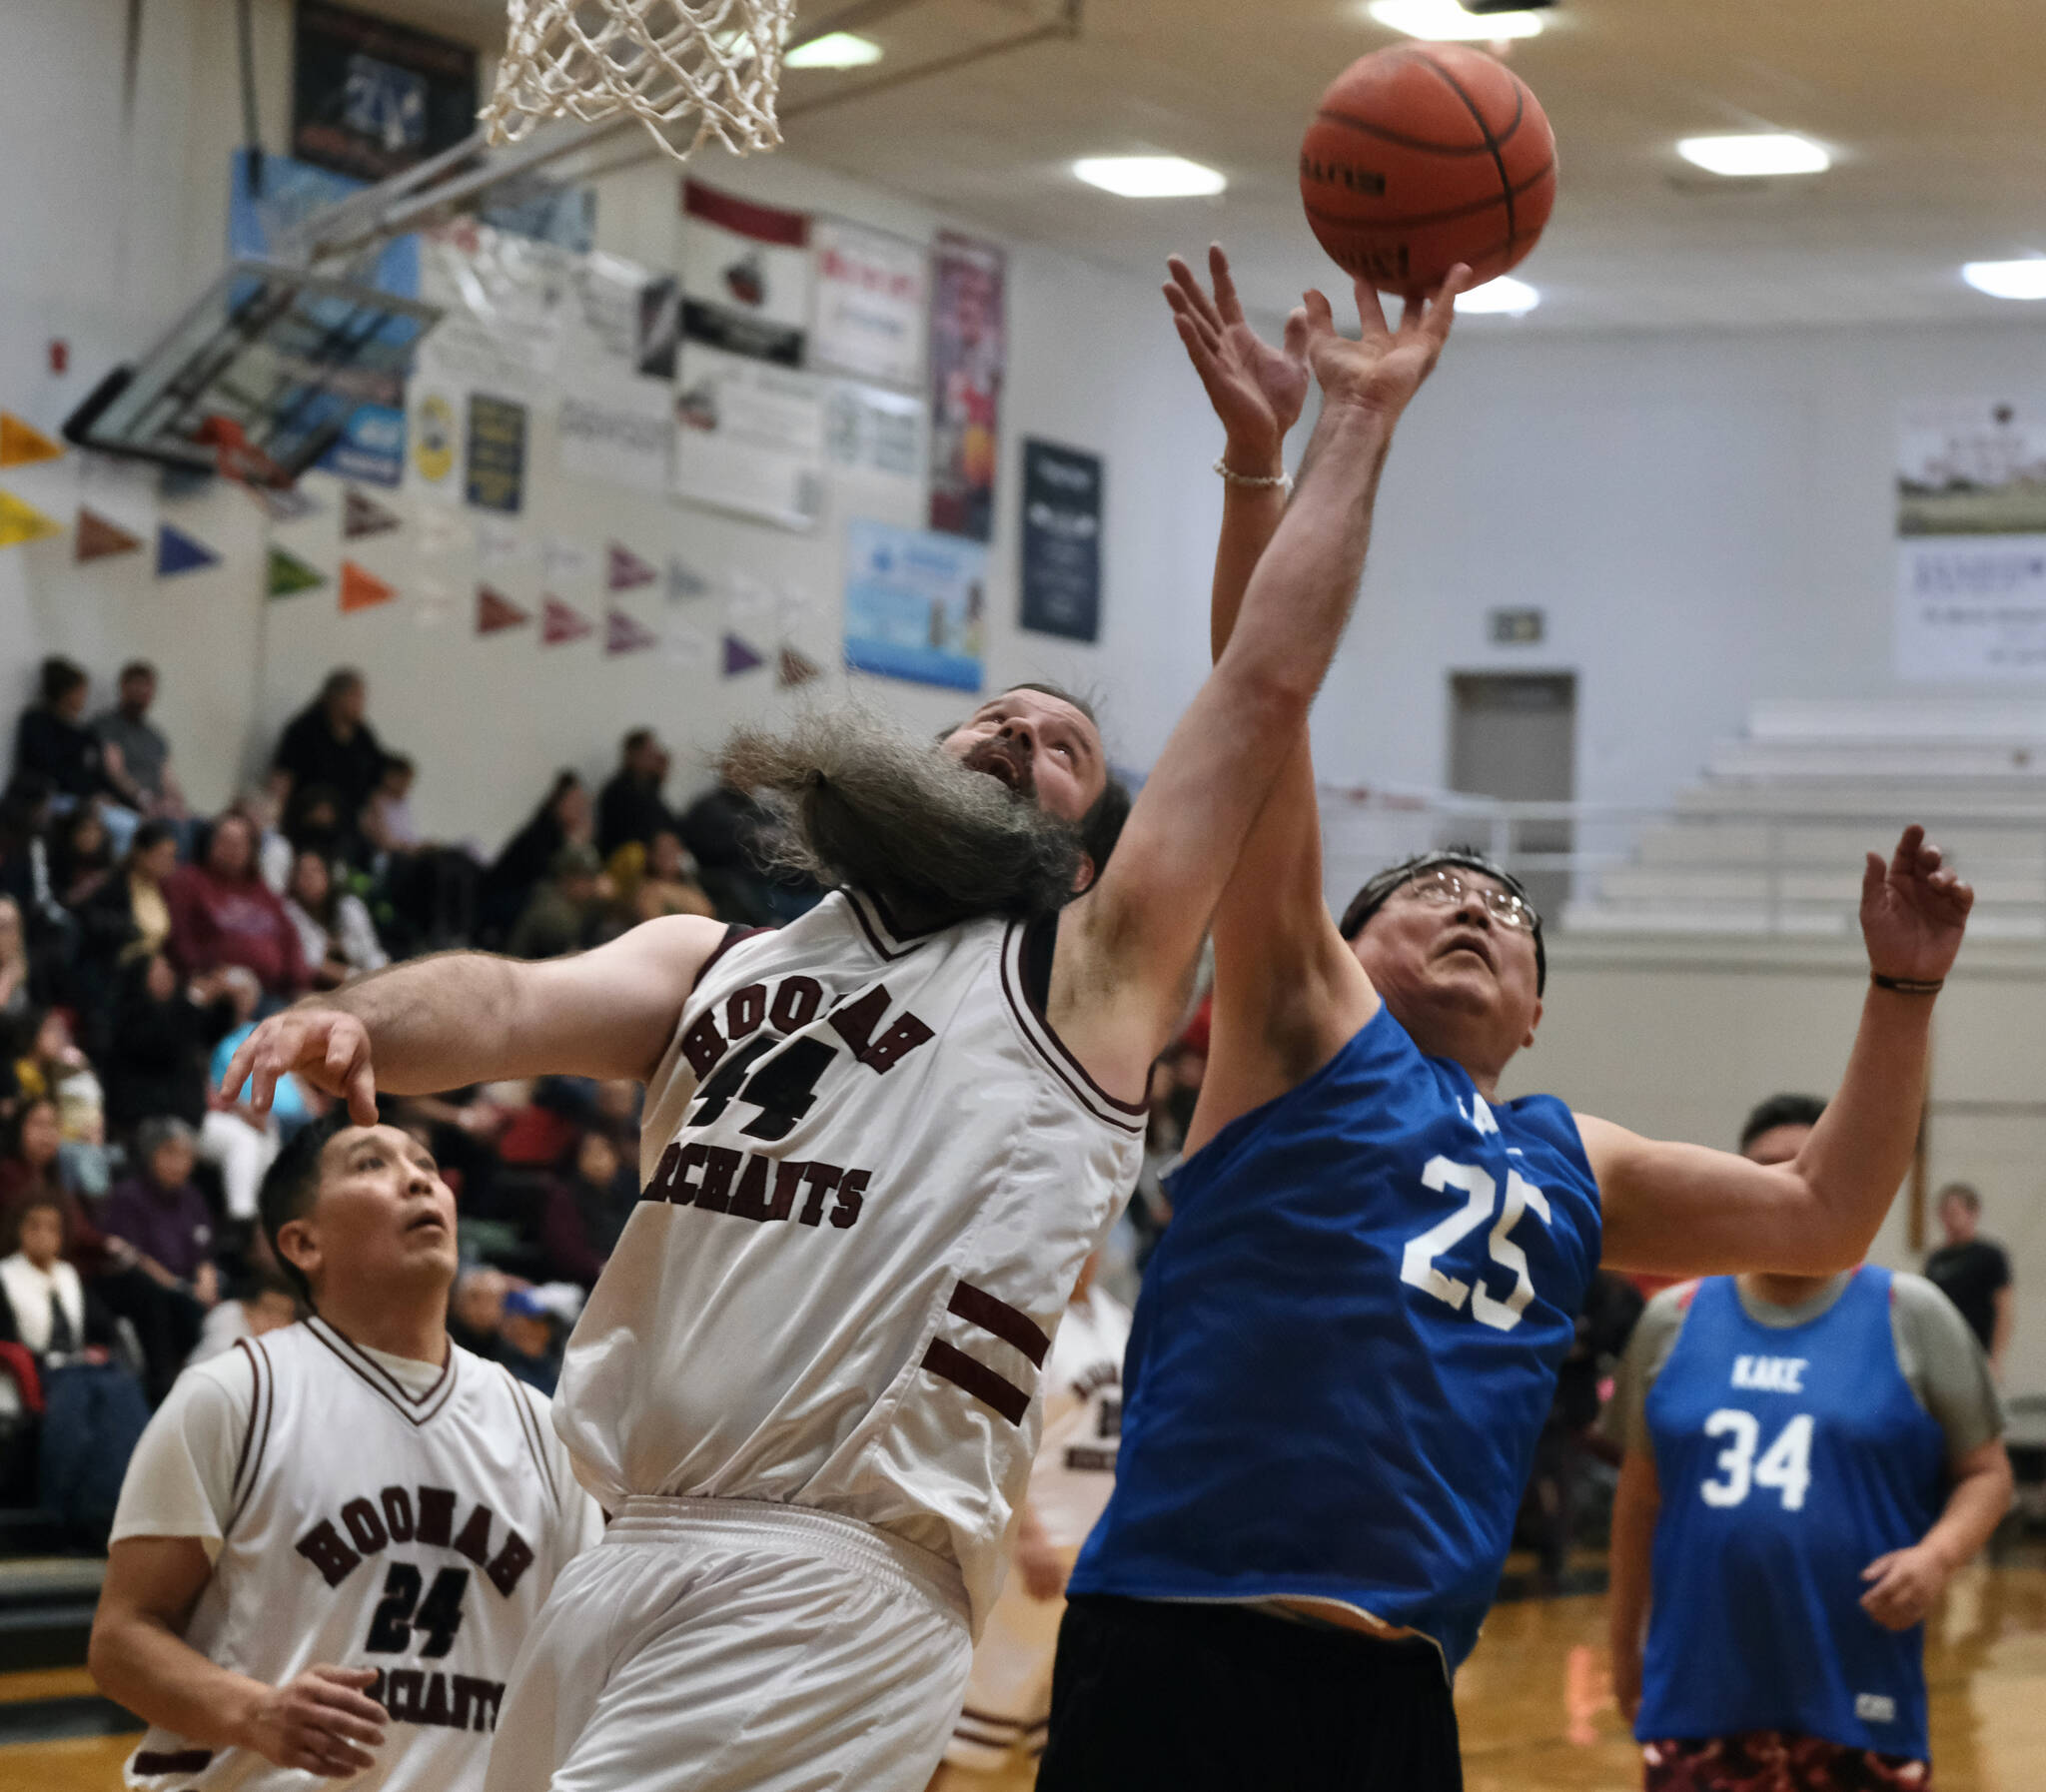 Hoonah’s Mark Prpich (44) battles for a rebound with a Kake player during Masters Bracket action at the Juneau Lions Club 74th Annual Gold Medal Basketball Tournament, Sunday, March 19, at the Juneau-Douglas High School: Yadaa.at Kalé gymnasium. (Klas Stolpe / For the Juneau Empire)